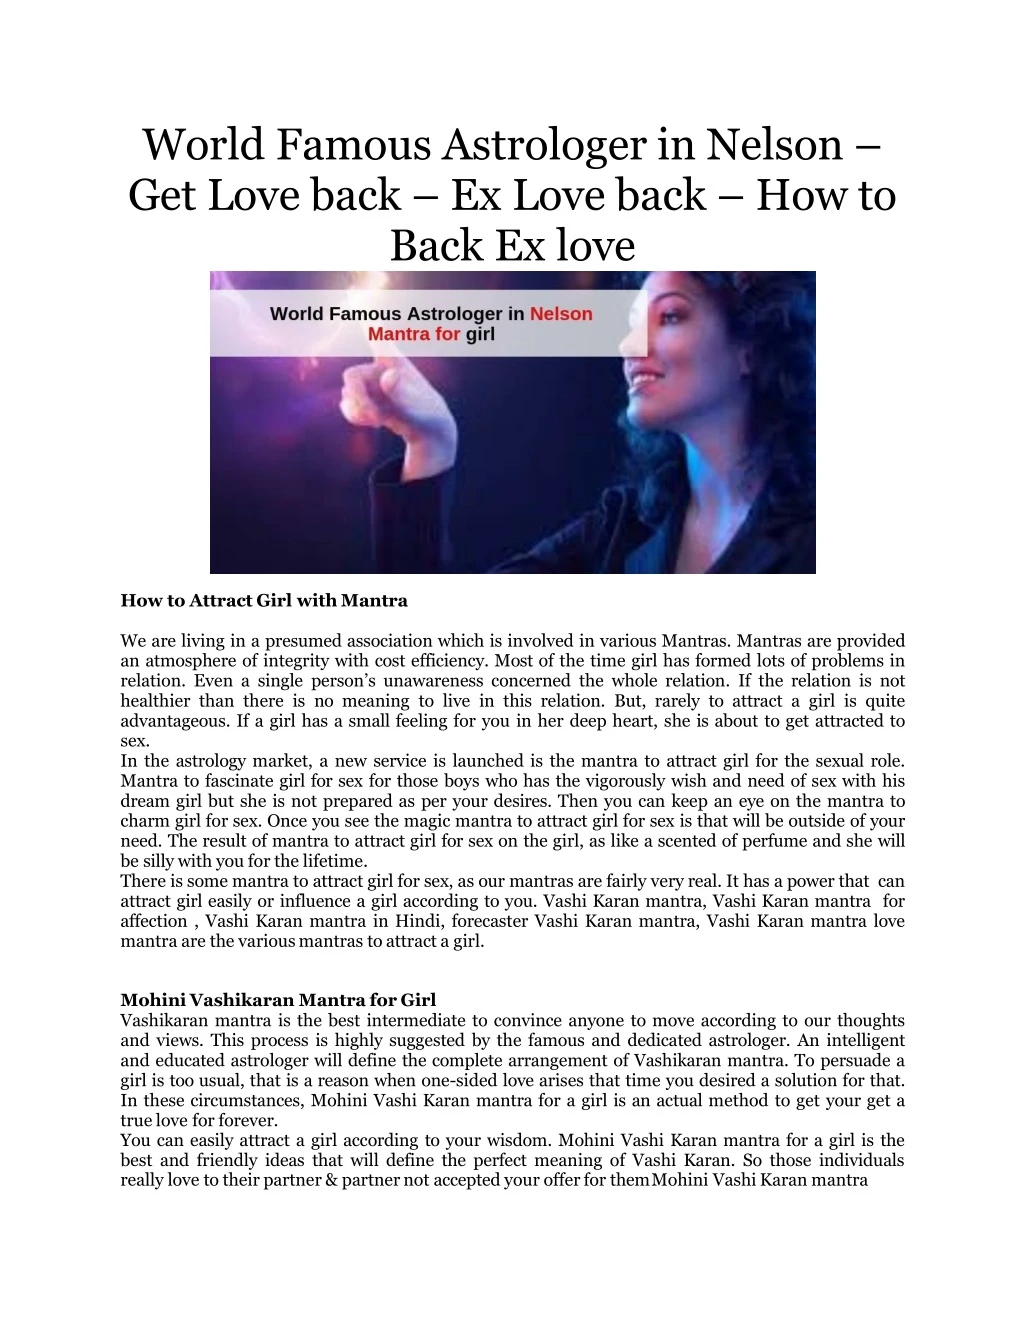 world famous astrologer in nelson get love back ex love back how to back ex love